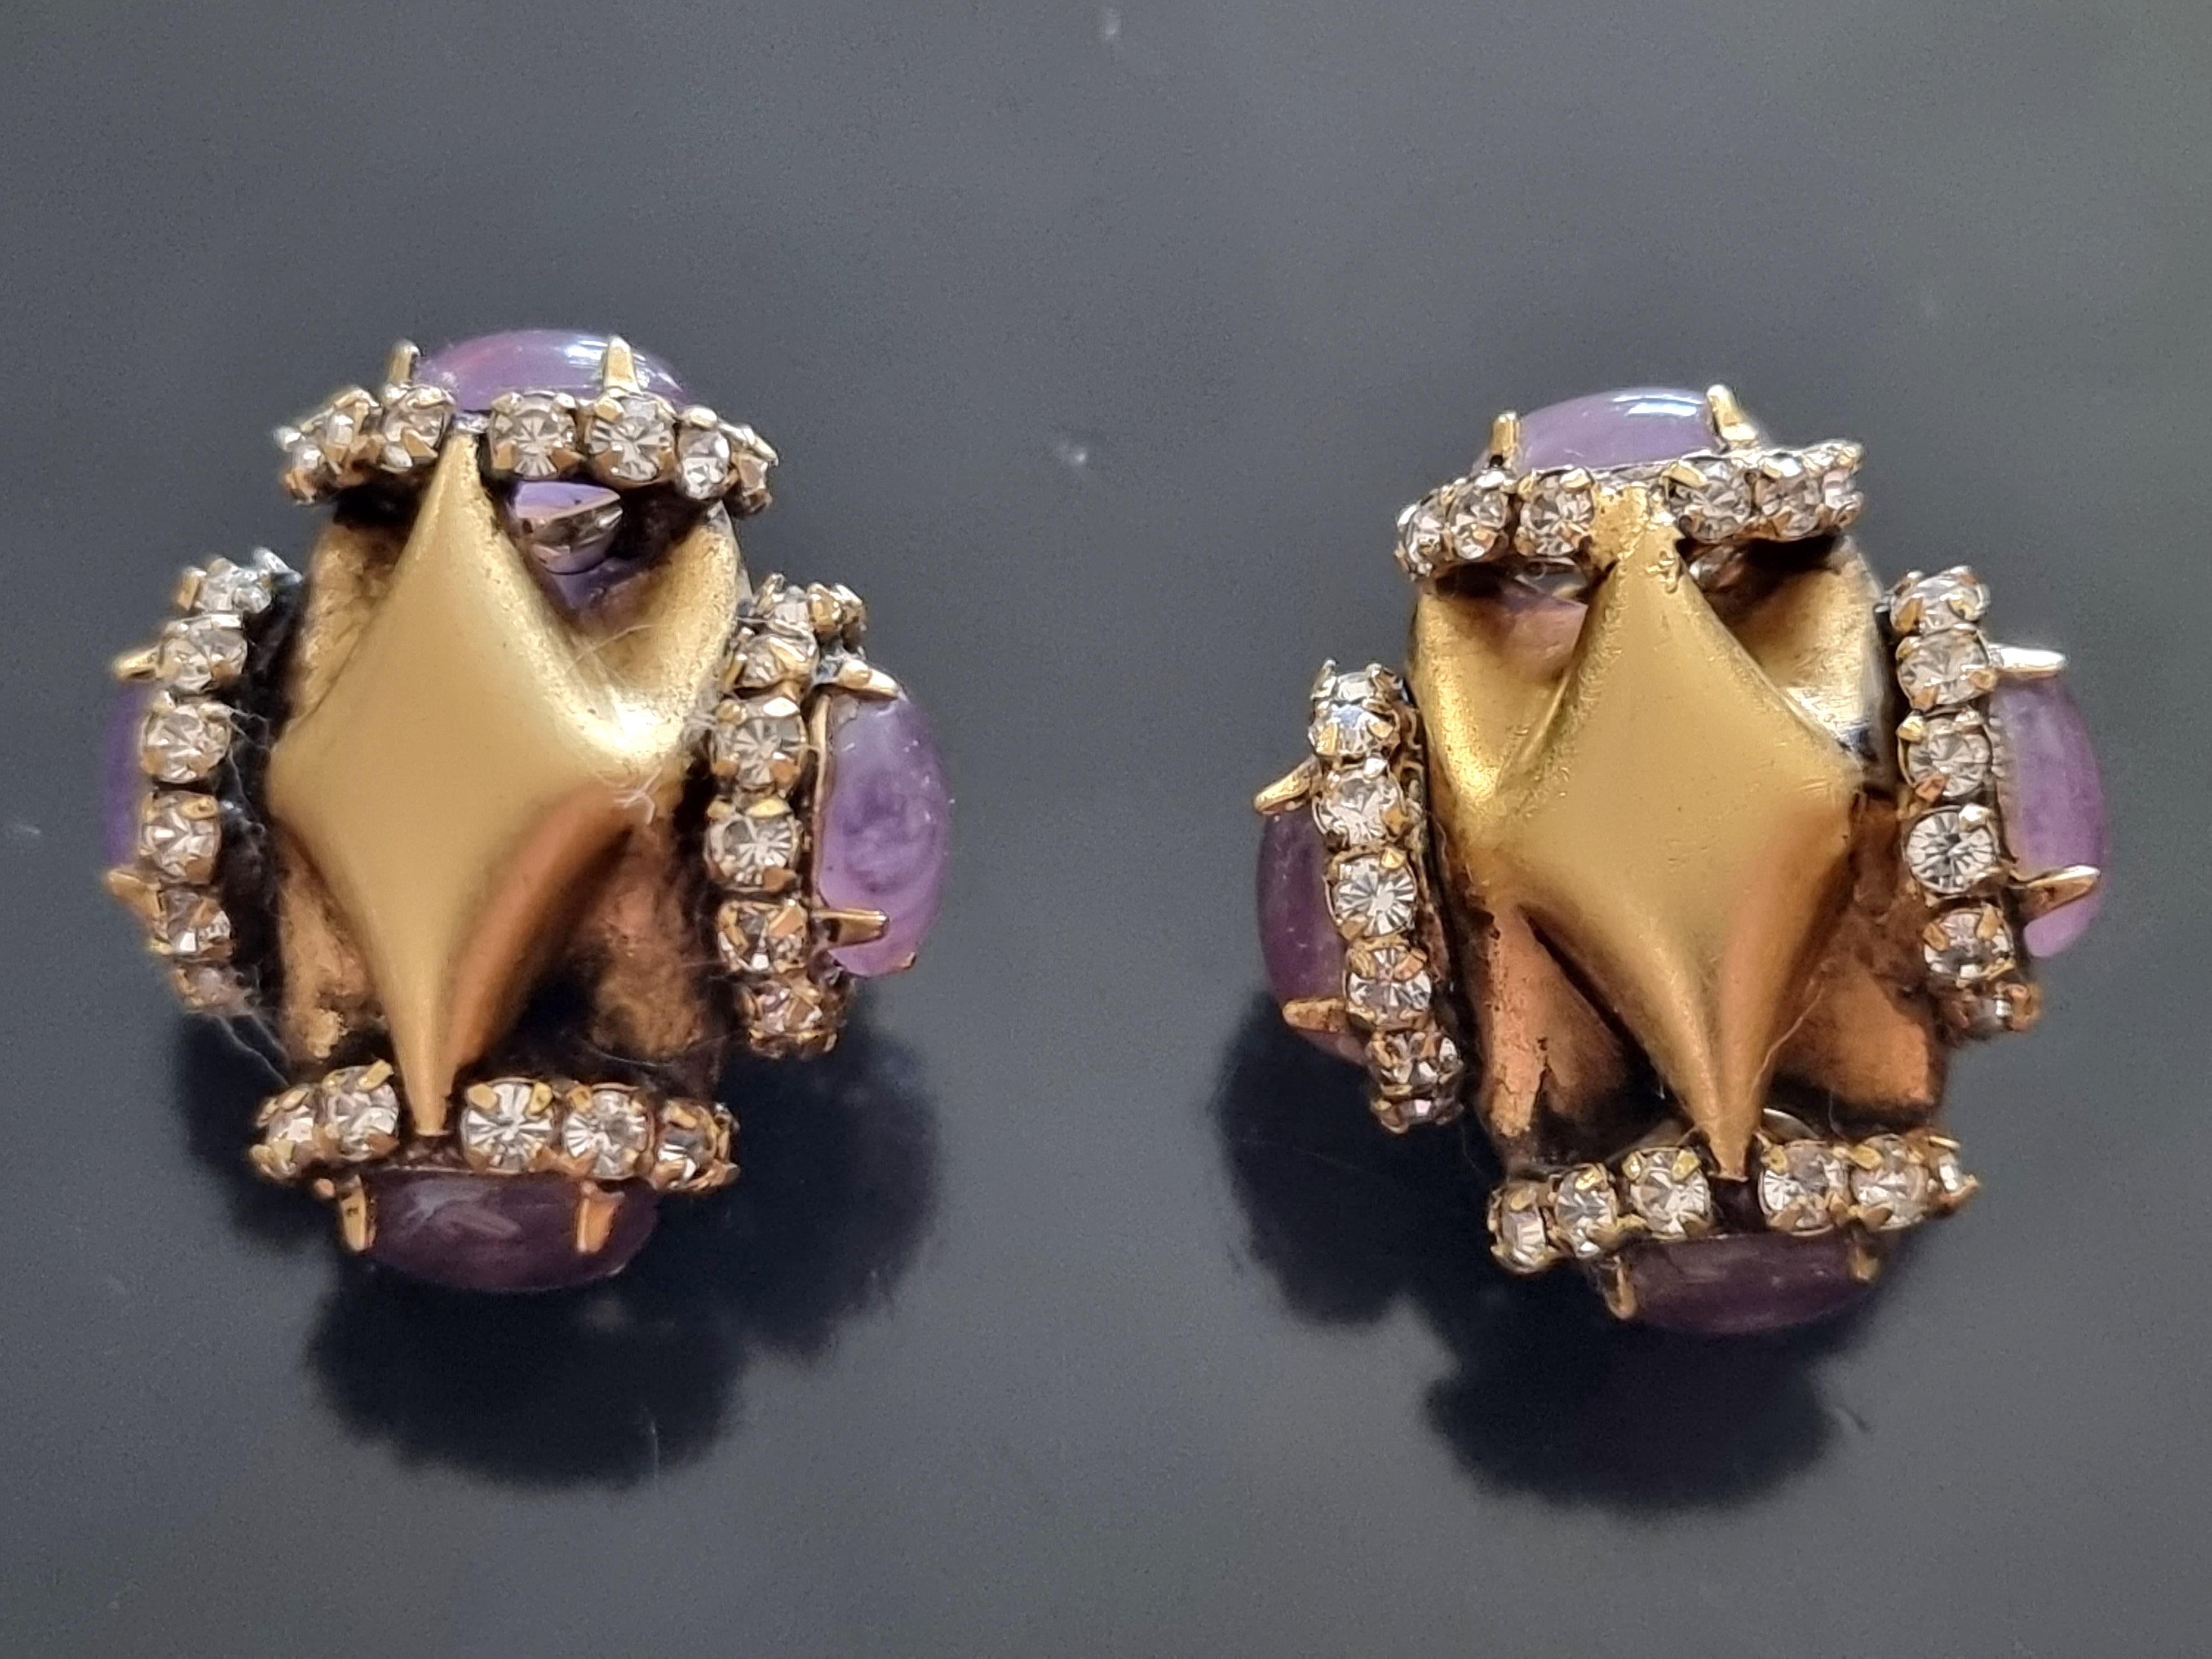 Magnificent Clip-on EARRINGS,
90s vintage,
golden metal, glass cabochons, rhinestones,
height 3 cm, width 2.7 cm, weight 1 x 12 g,
exceptional quality work,
good condition, cleaning to be planned to give them a little more shine.

Iradj Moini has